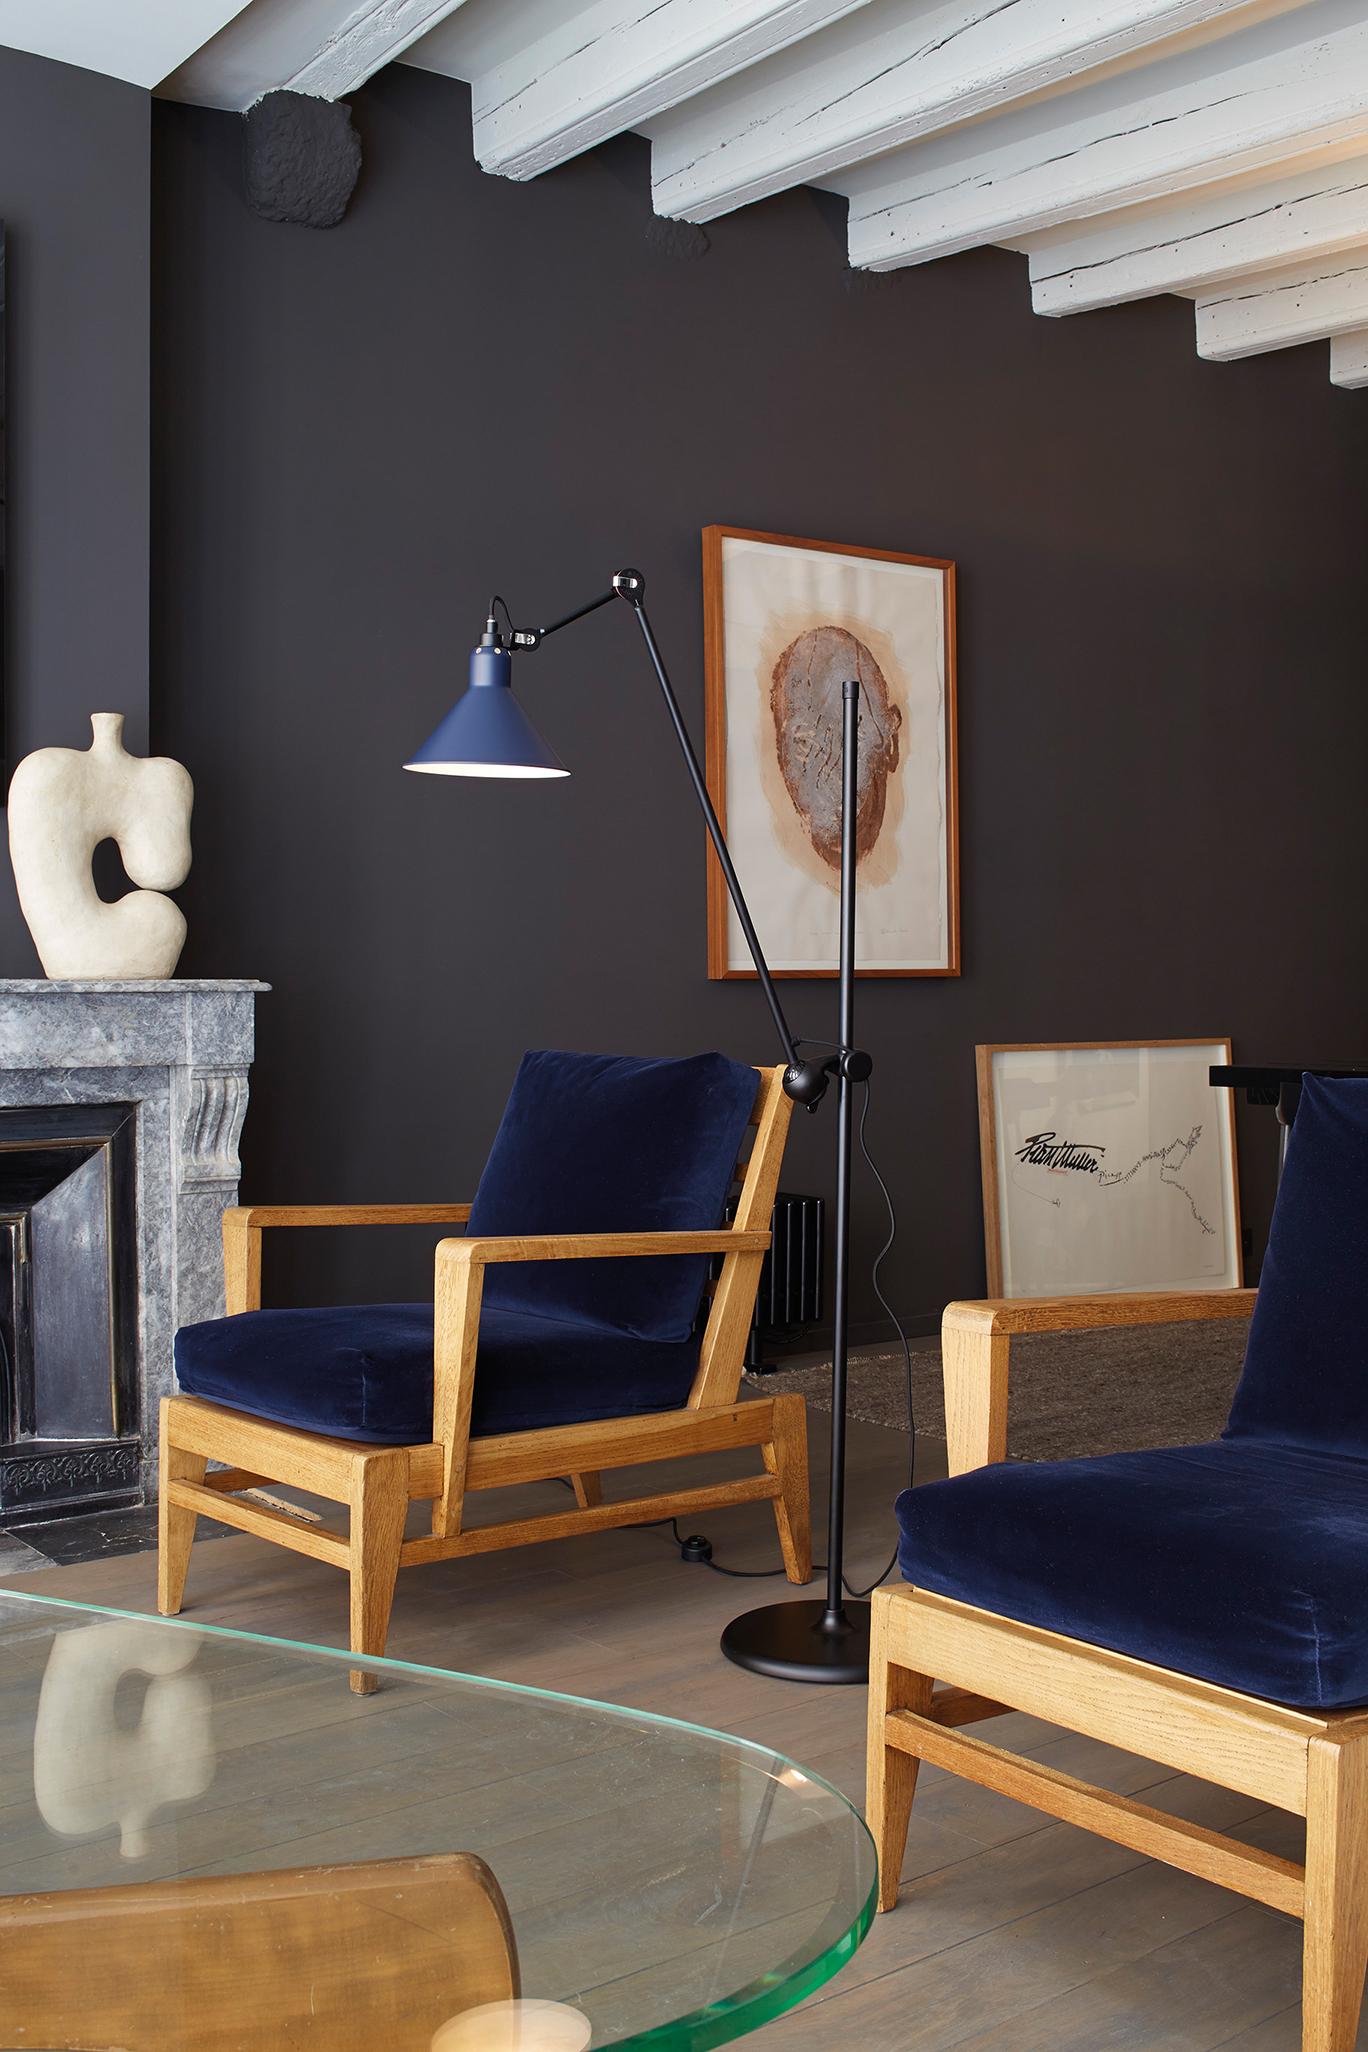 DCW Editions Lampe Gras N°215 Floor Lamp in Black Steel Arm and Raw Copper Shade by Bernard-Albin Gras
 
 In 1921 Bernard-Albin GRAS designed a series of lamps for use in offices and in industrial environments. The GRAS lamp, as it was subsequently